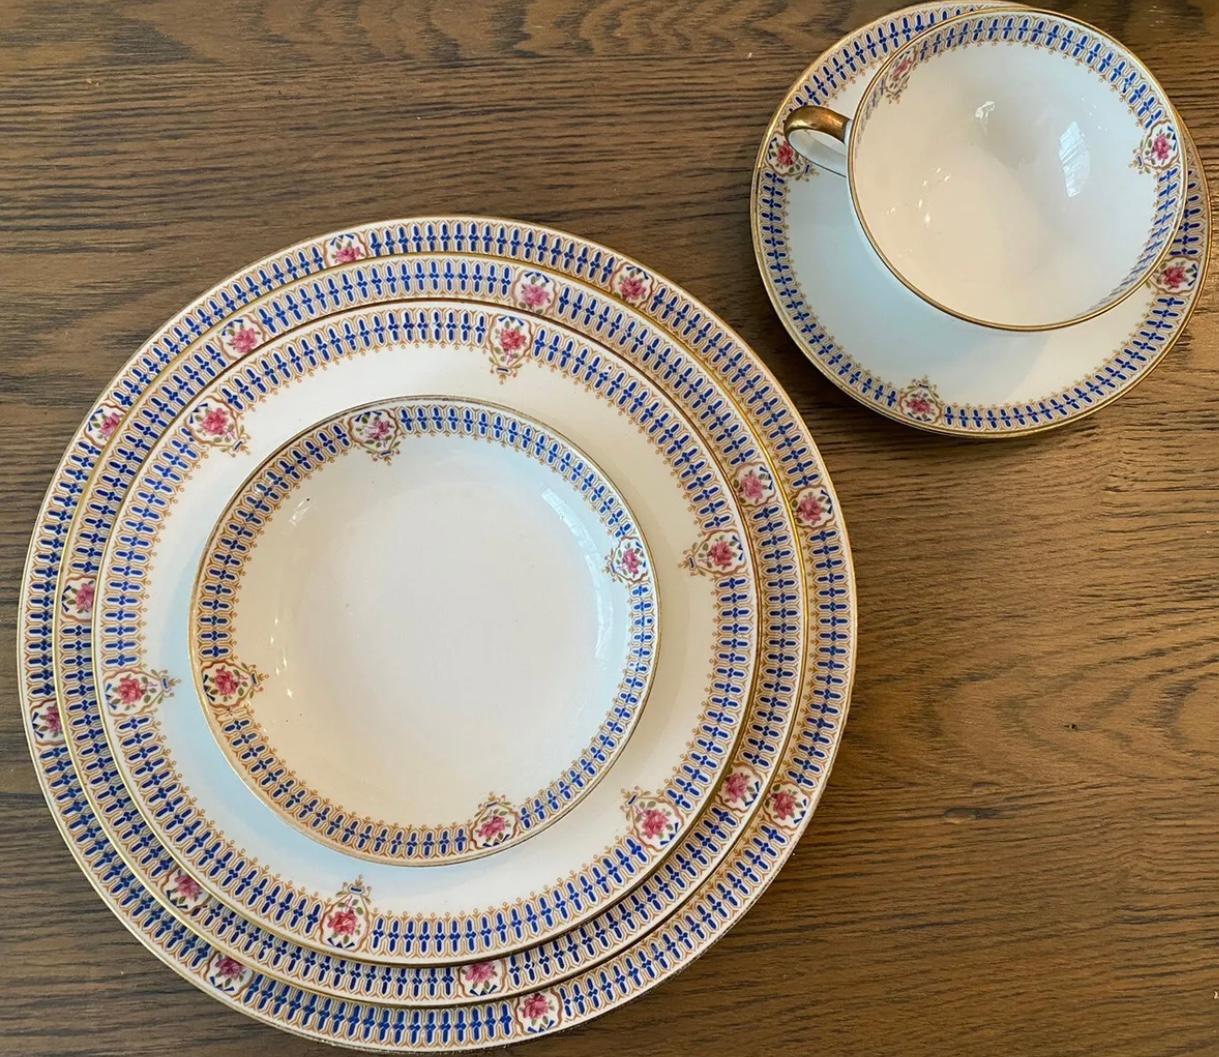 Stunning Antique C Arhenfeldt Limoges Depose Blue and Gold Floral Plate Set-Service for 6** Plus Serving Dishes in Excellent Condition. Complete service for 6 settings** PLUS servings dishes. Great condition for age- no chips, cracks, or crazing.